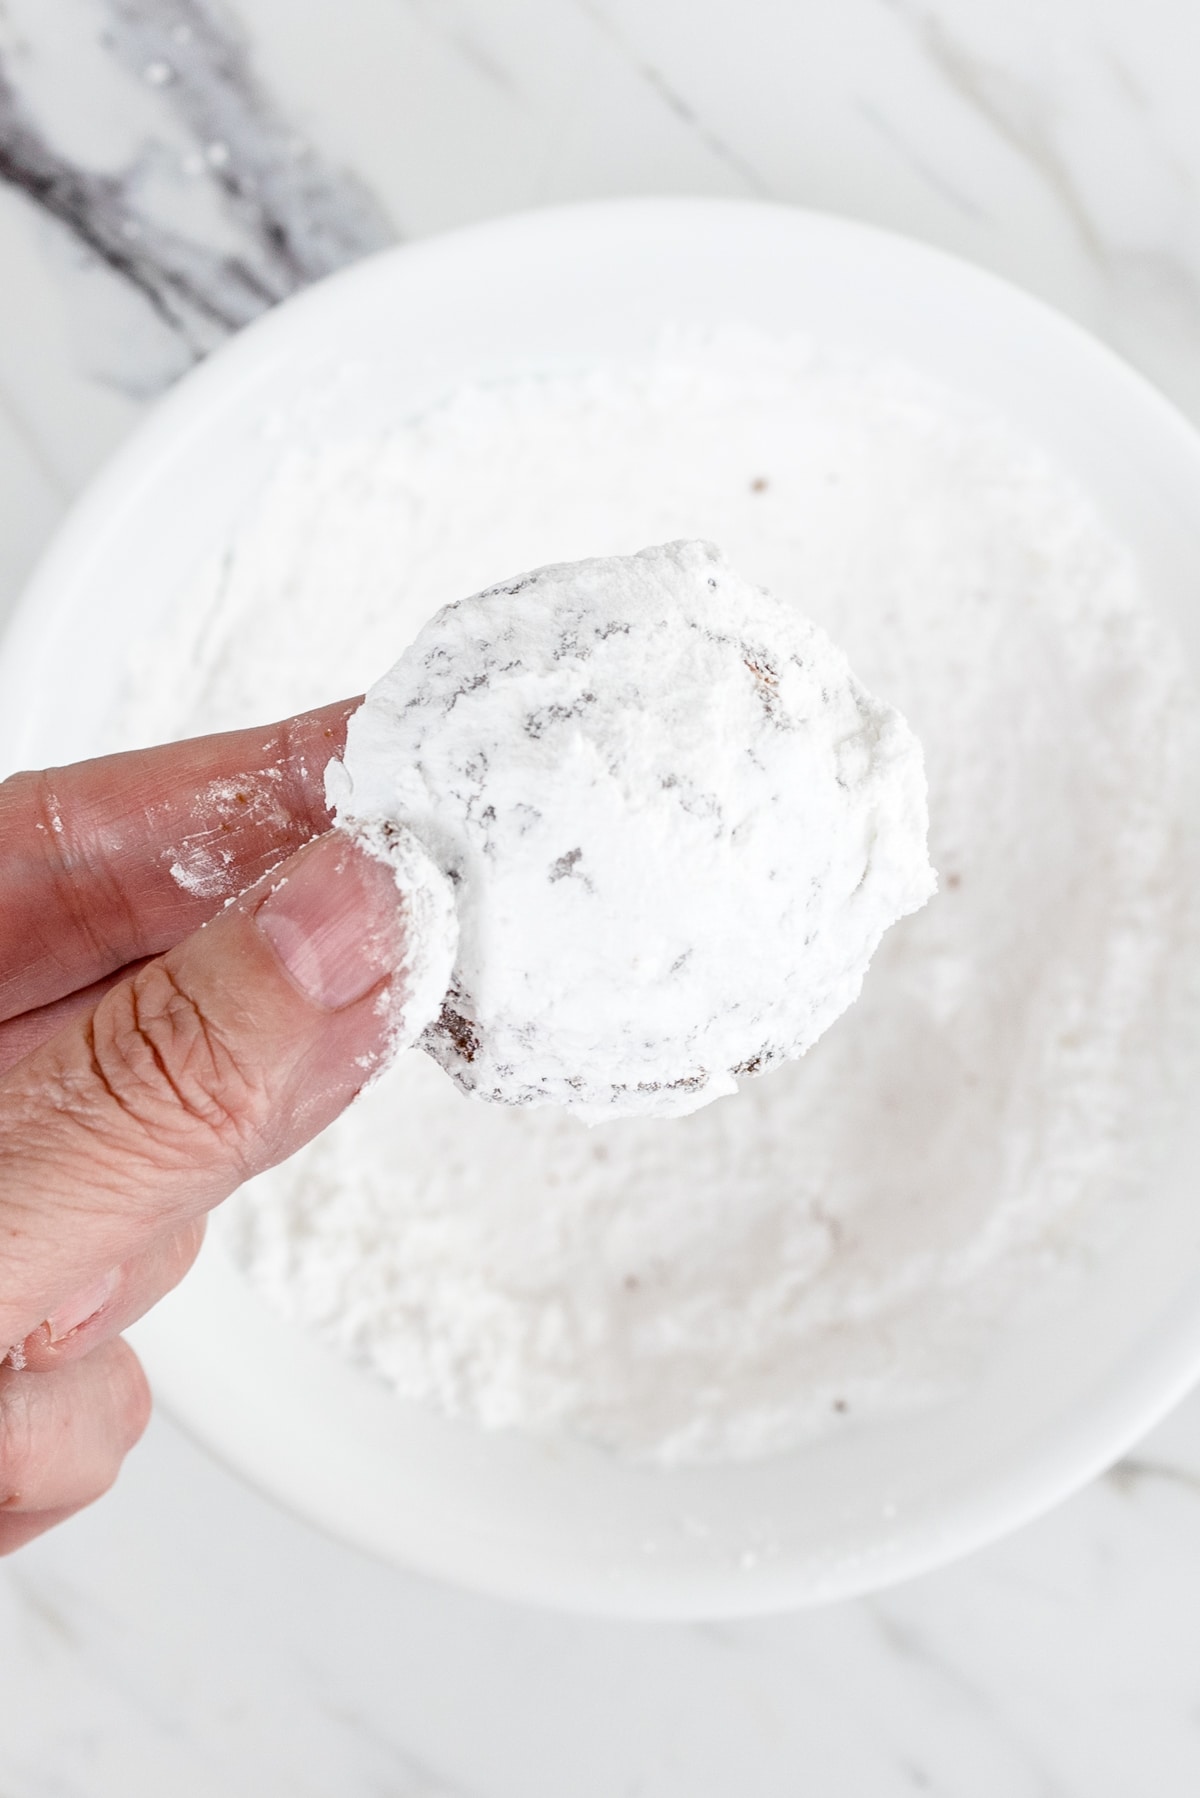 Top view of a chocolate cookie coated in powdered sugar being held above a small bowl filled with powdered sugar.